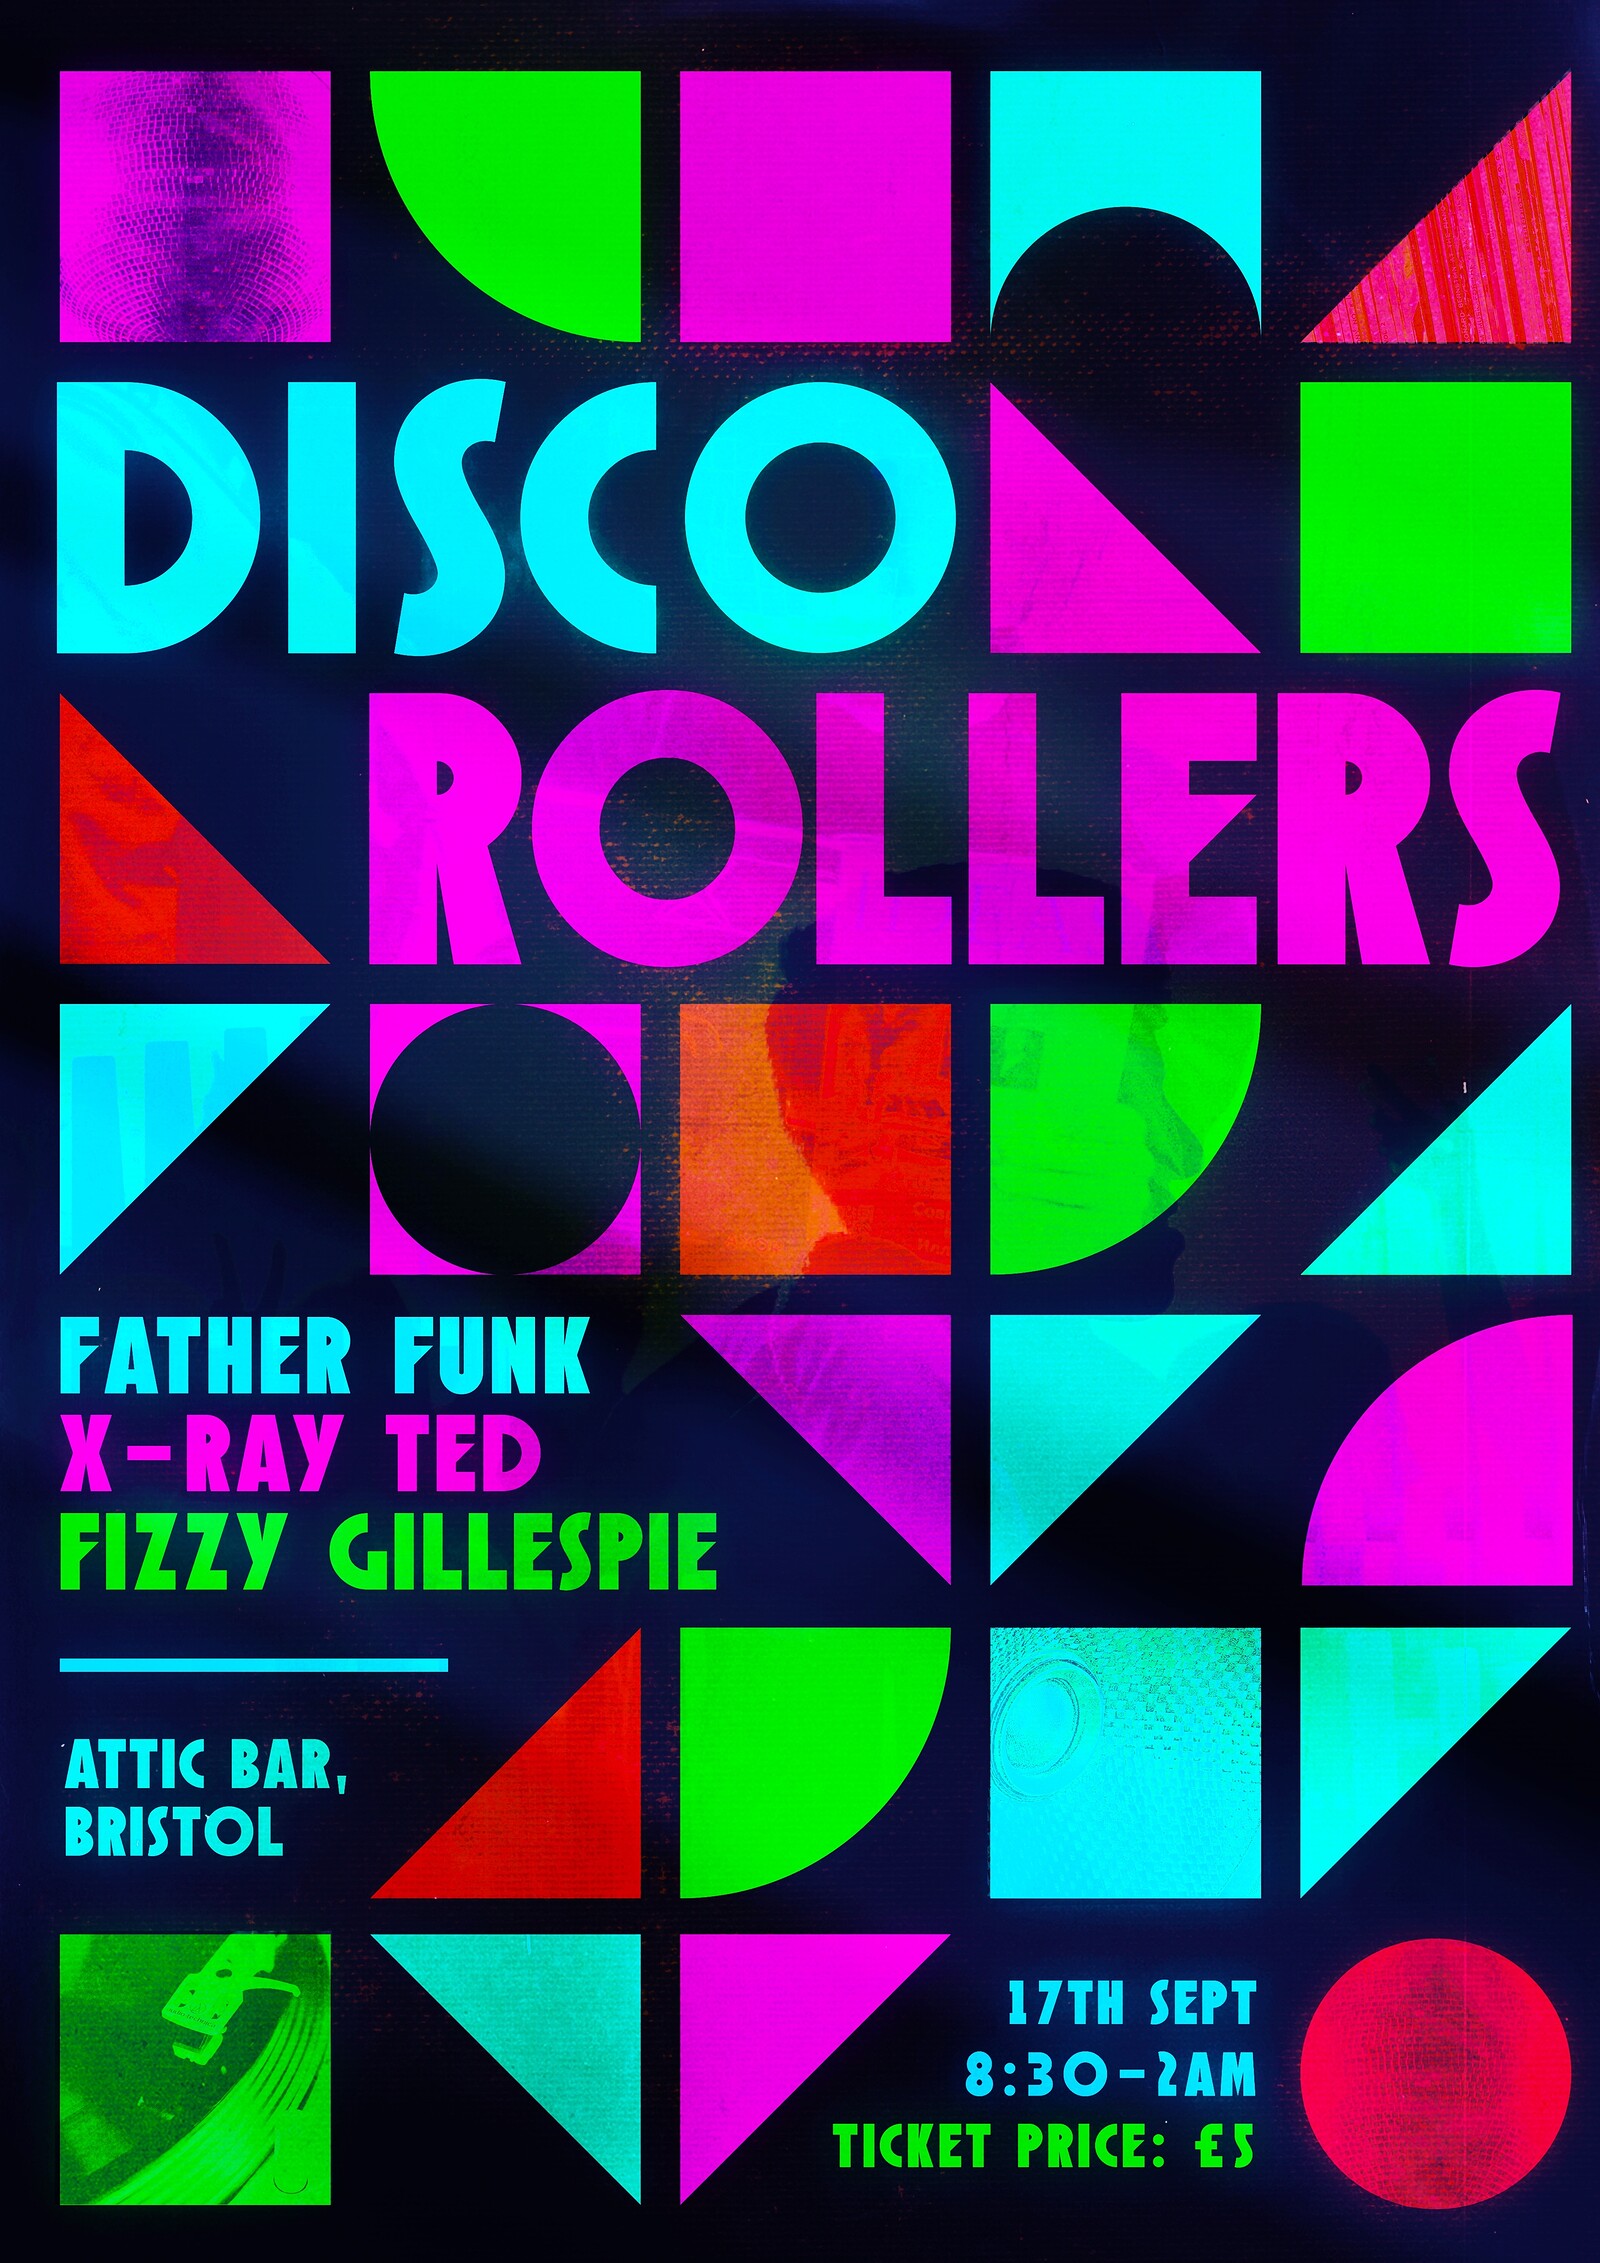 Disco Rollers - Father Funk / X-Ray Ted / Fizzy G at The Attic Bar